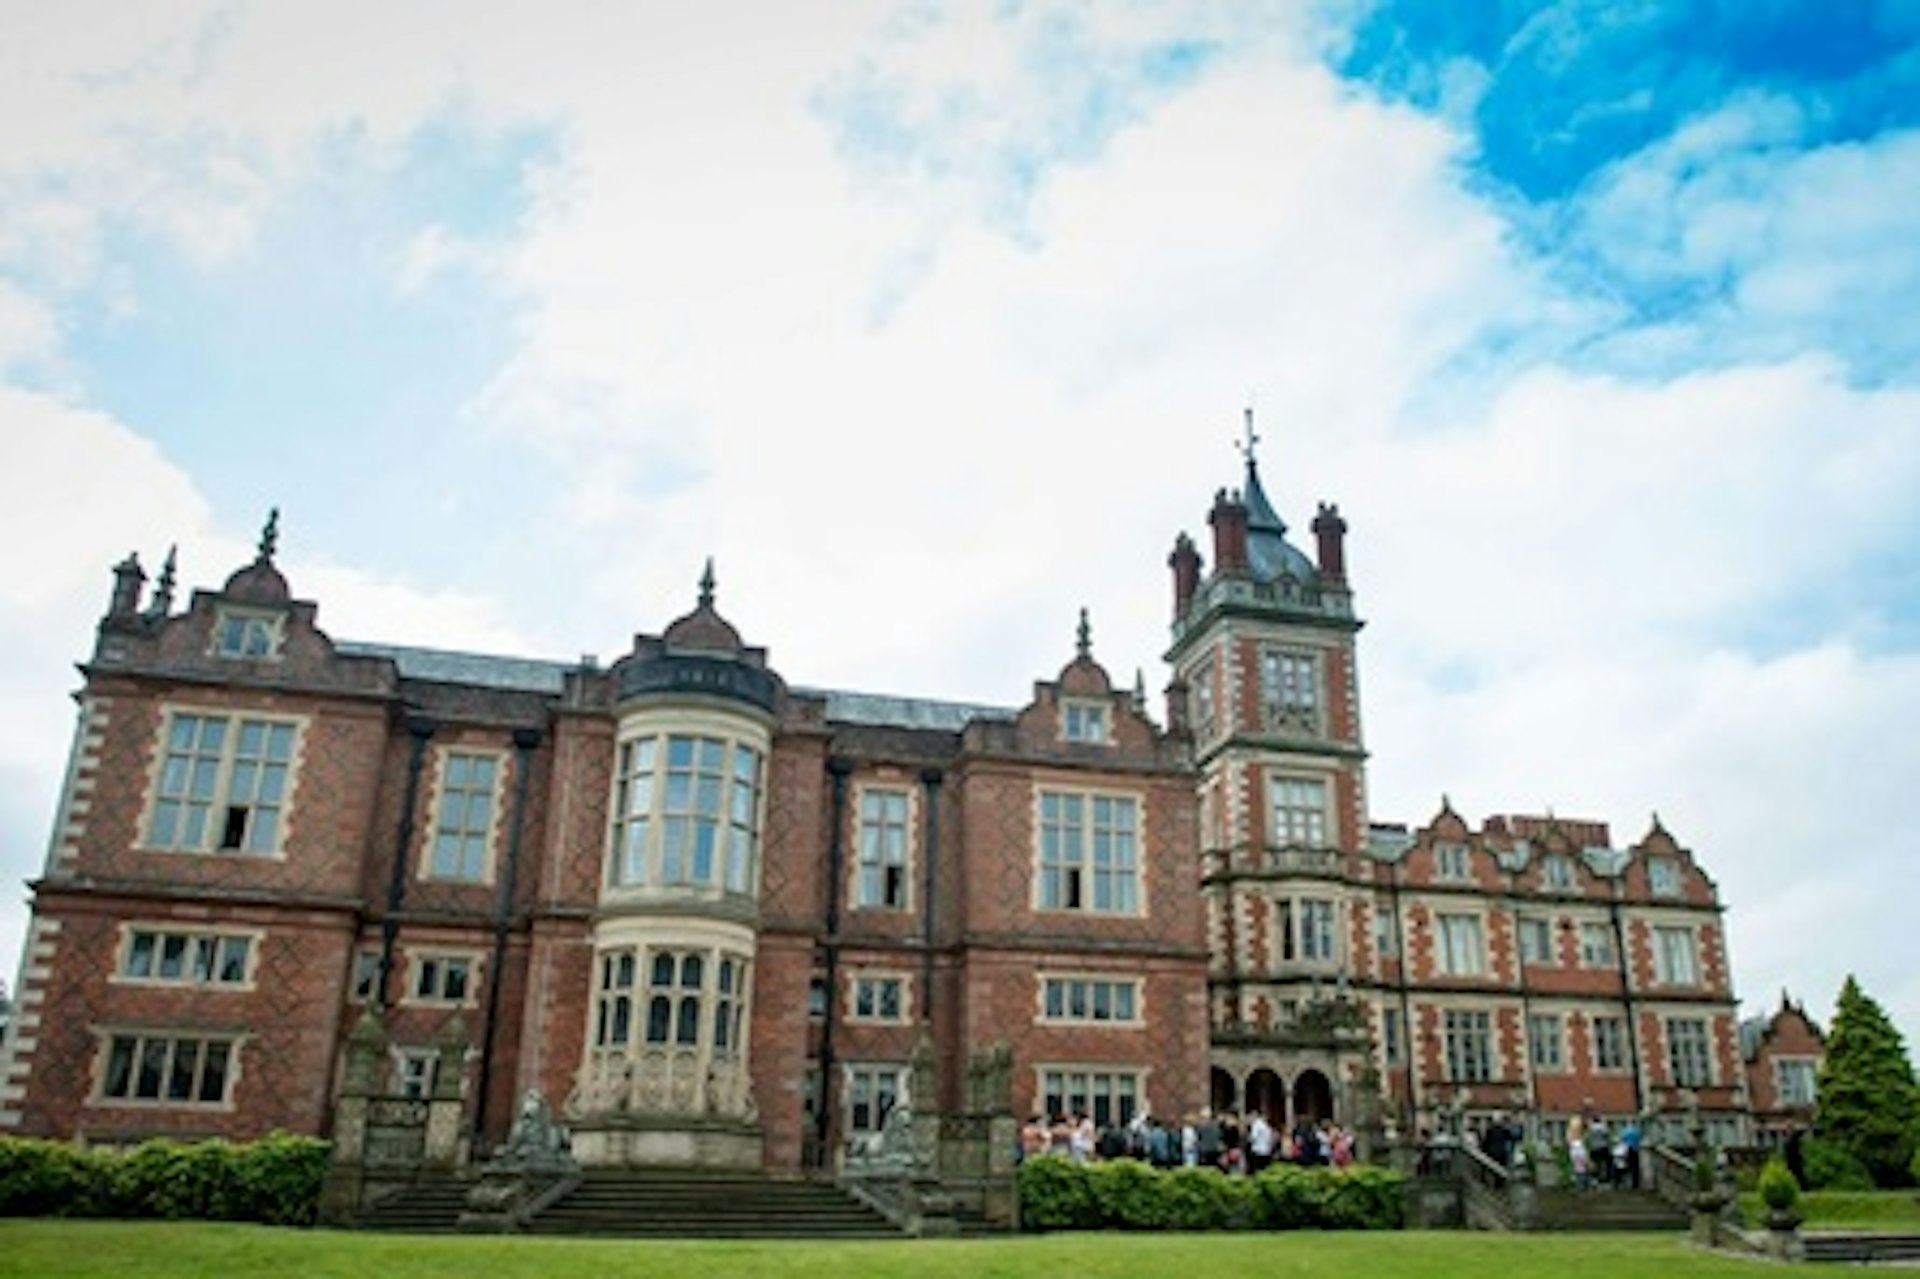 Weekend Indulgence Spa Day with Treatments, Lunch and Fizz for Two at the 4* Crewe Hall Hotel & Spa 2